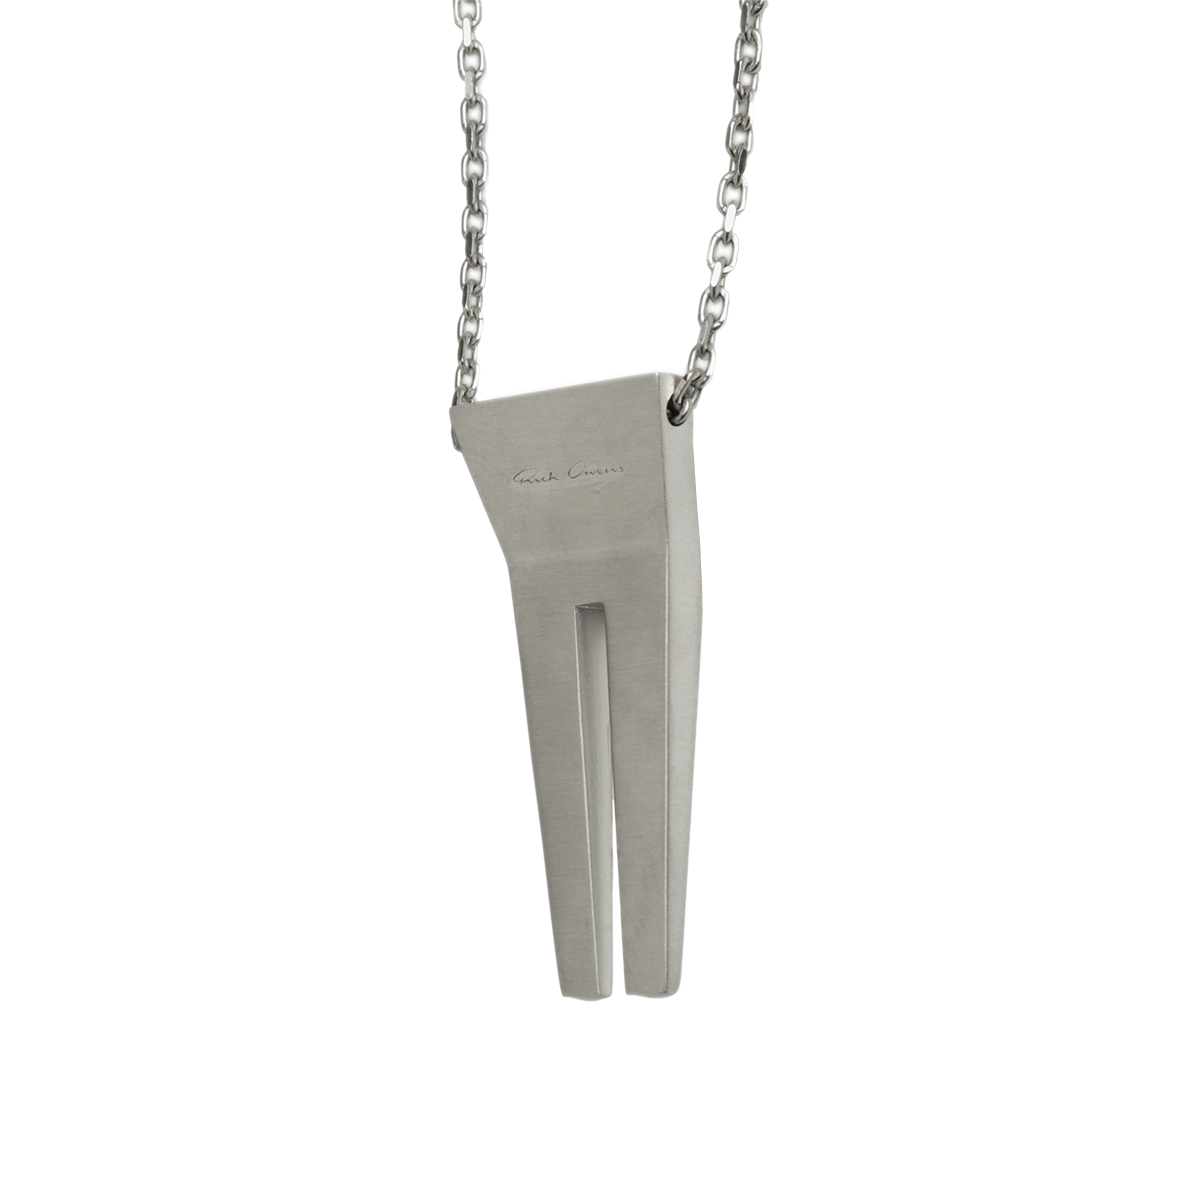 RICK OWENS (リック・オウエンス) - OPEN TRUNK CHARM NECKLACE